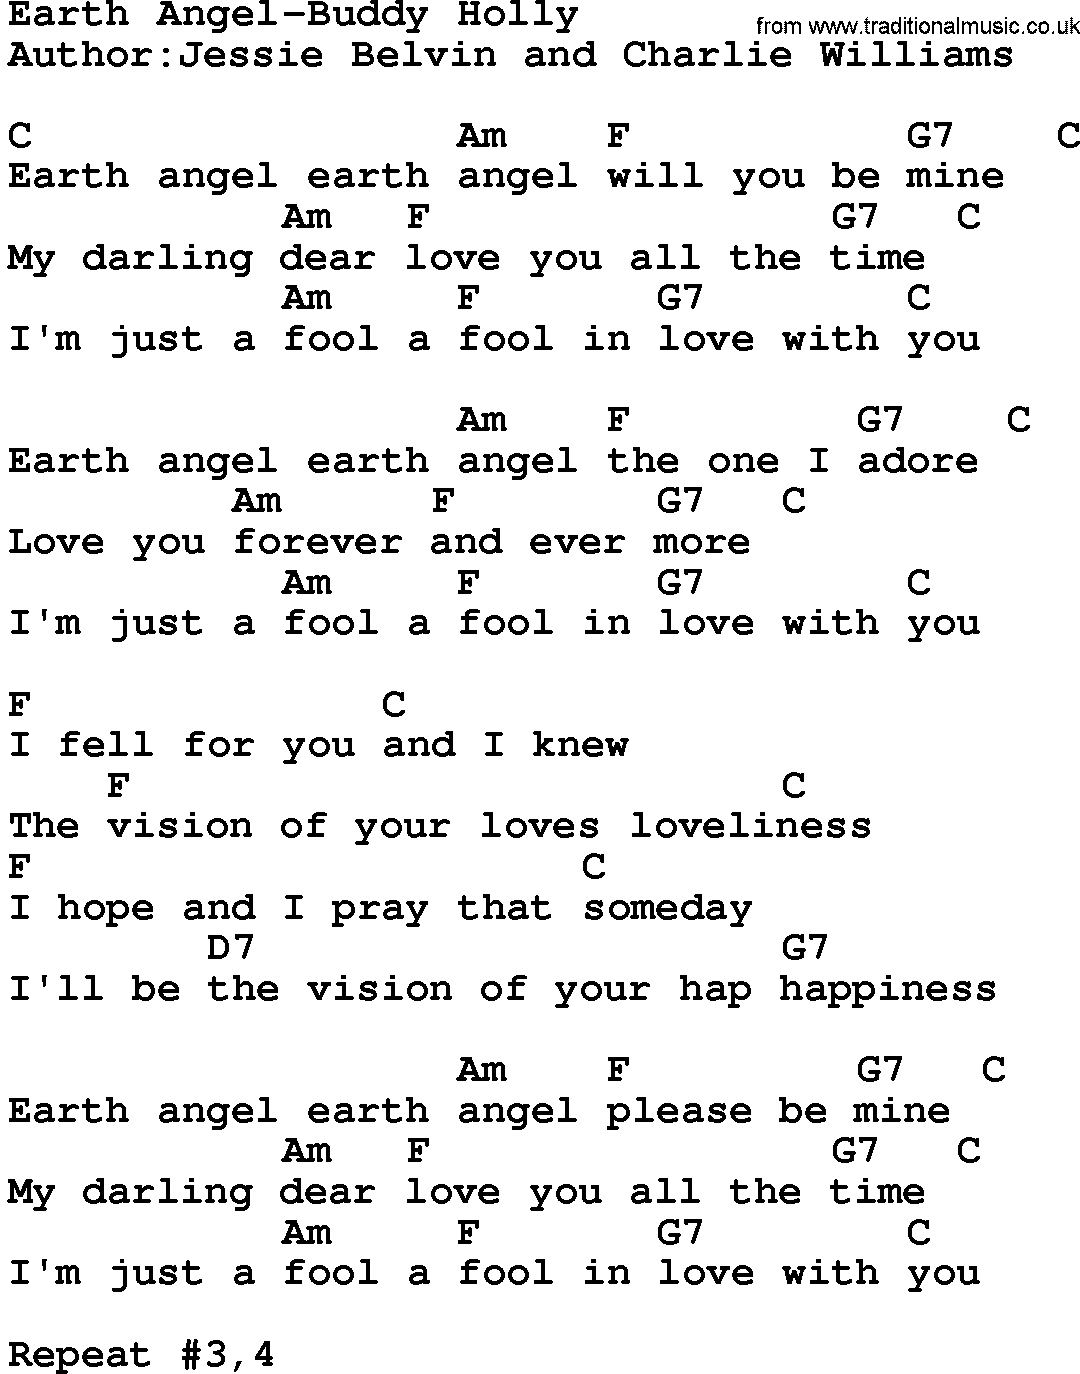 Country music song: Earth Angel-Buddy Holly lyrics and chords